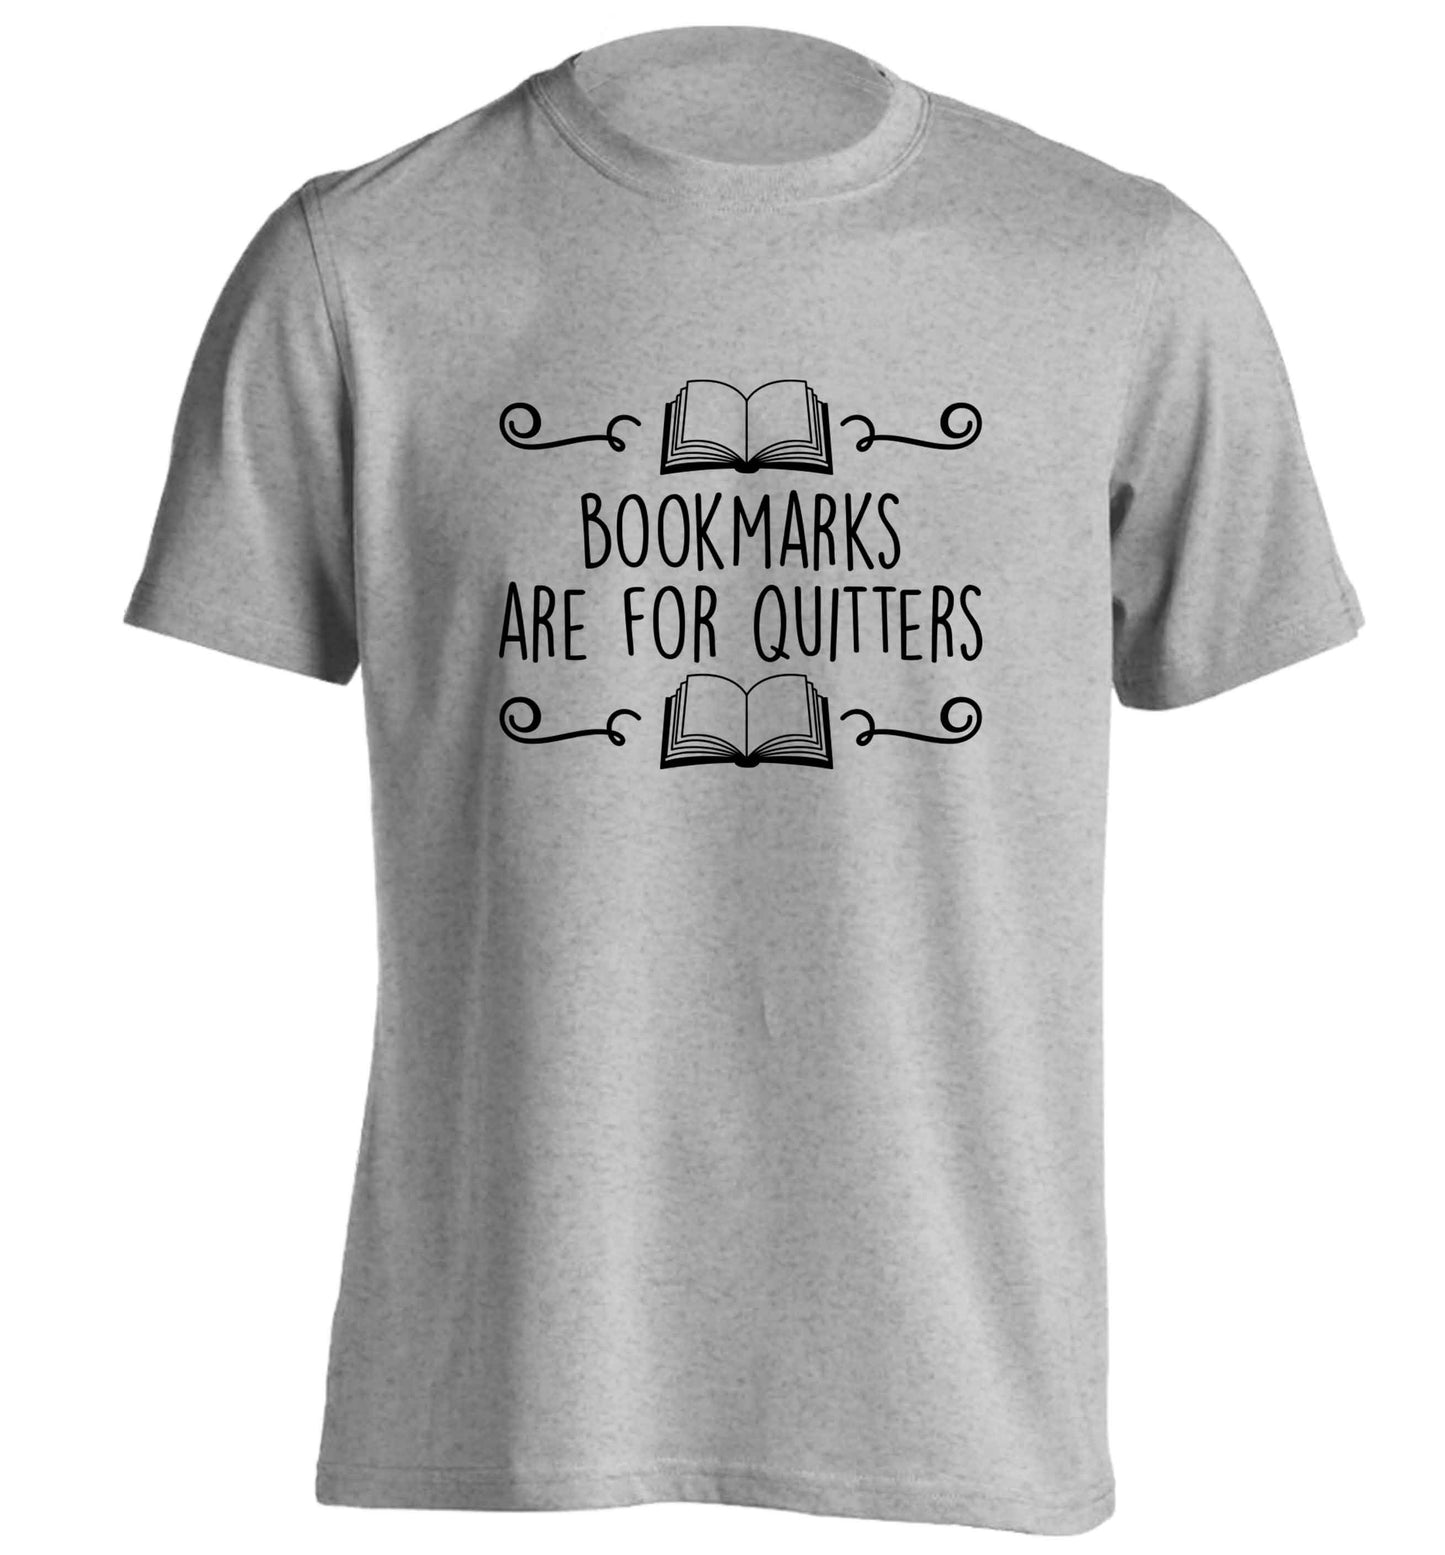 Bookmarks are for quitters adults unisex grey Tshirt 2XL